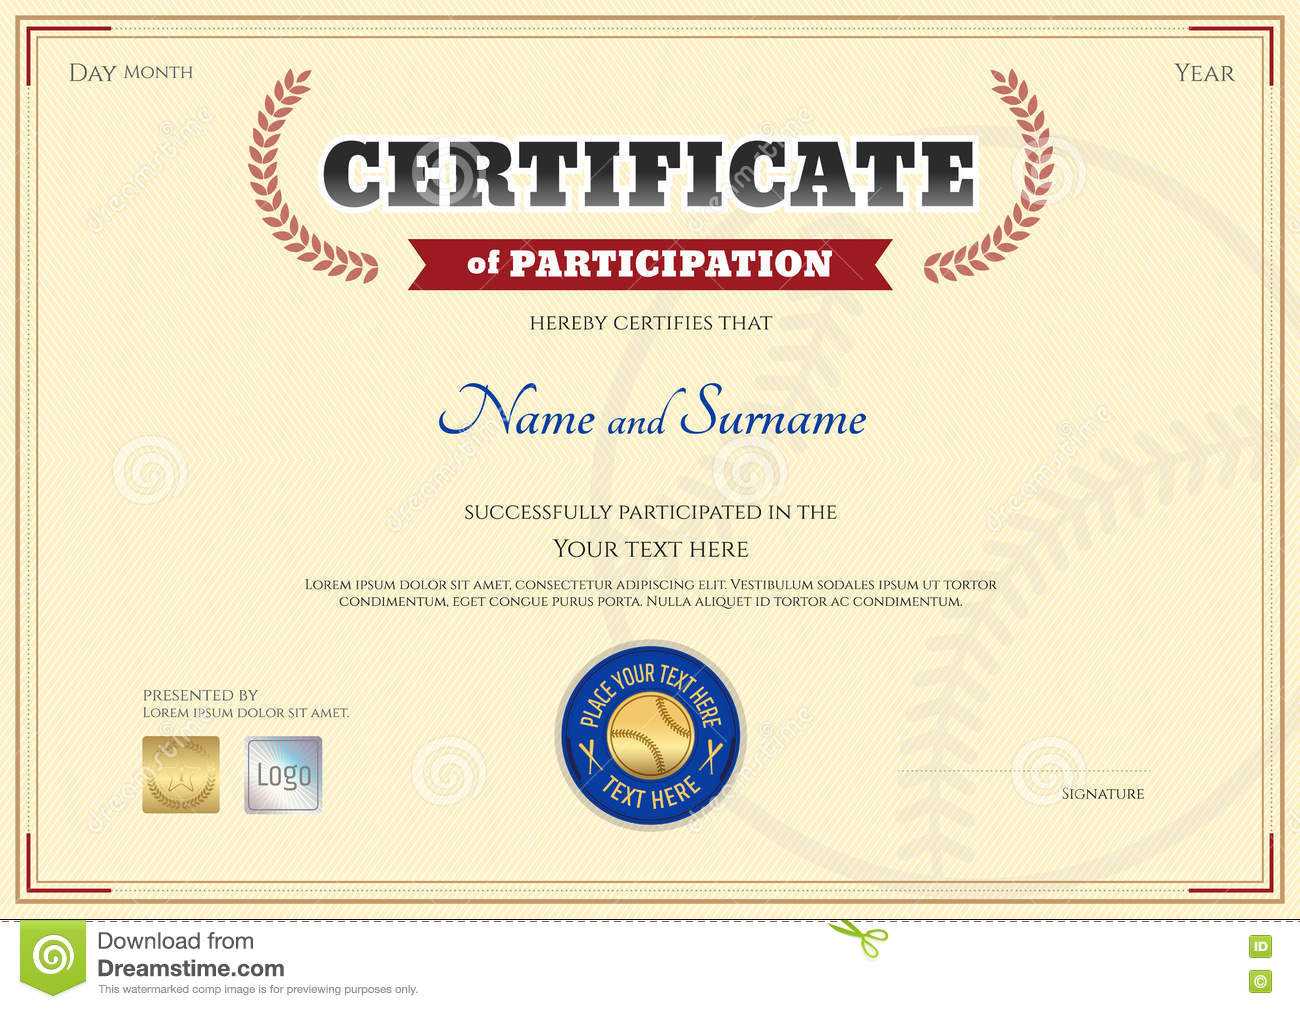 Certificate Of Participation Template In Baseball Sport For Sports Day Certificate Templates Free